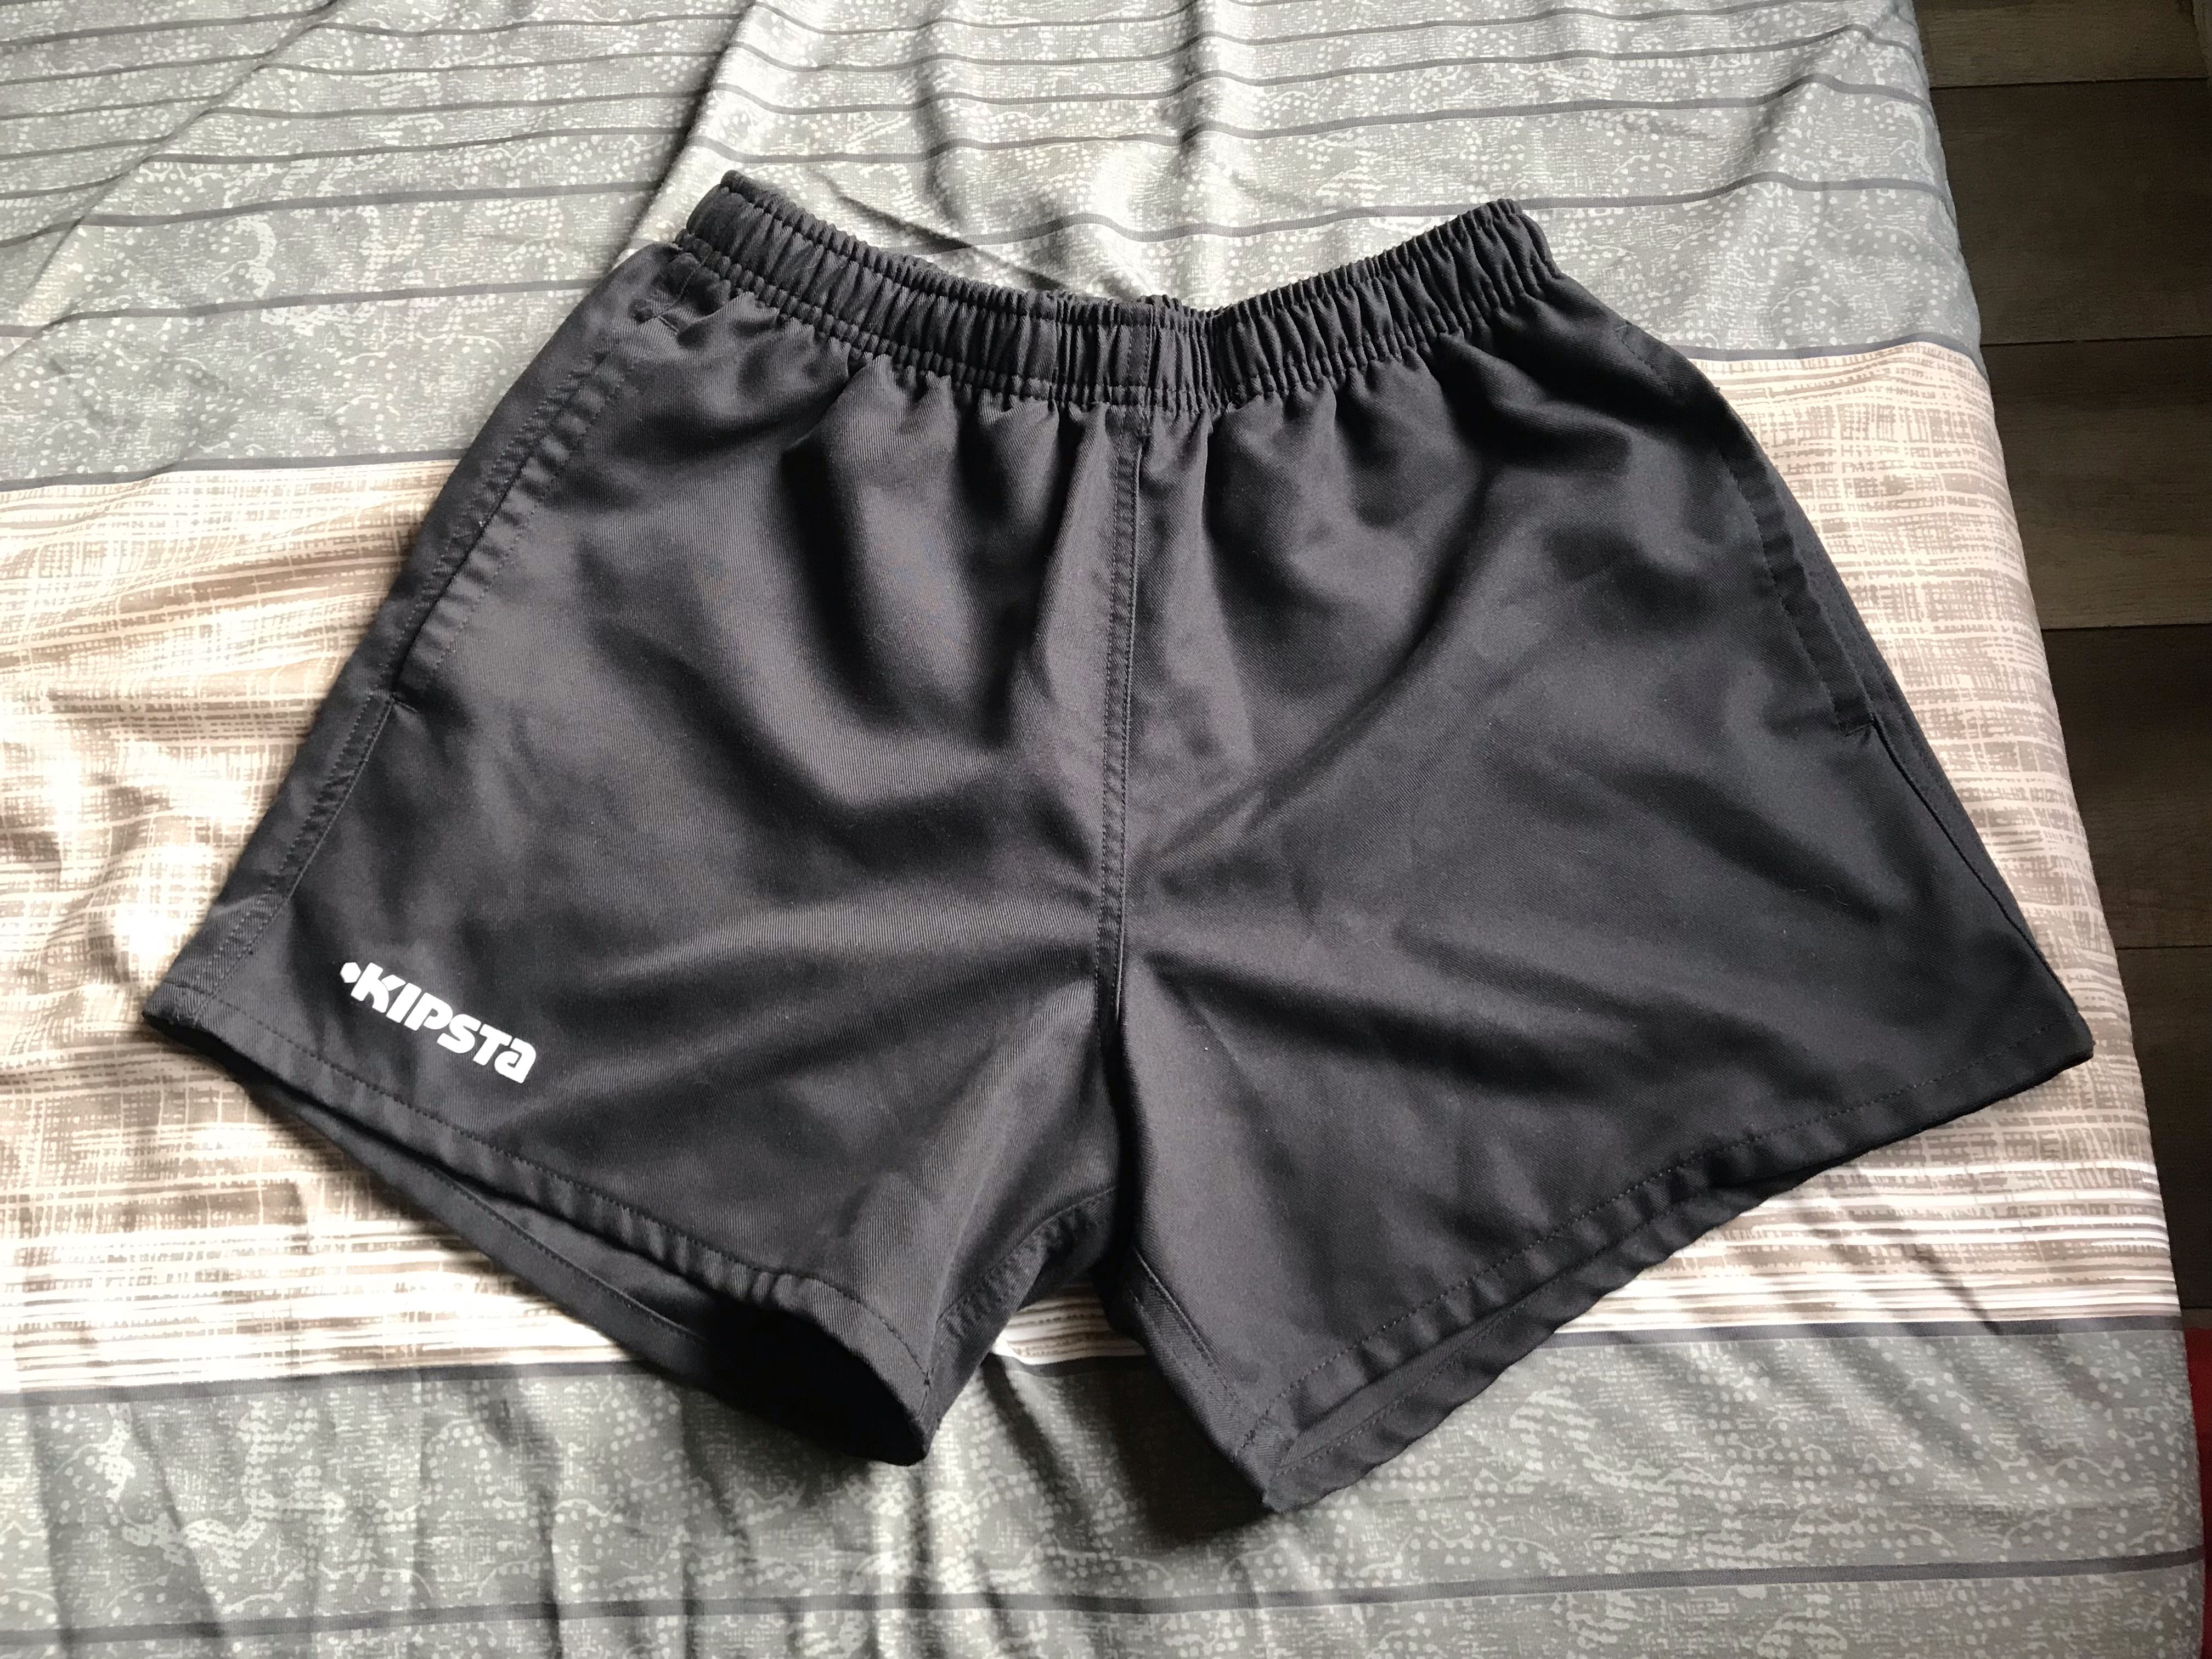 Kipsta rugby shorts, Sports, Sports 